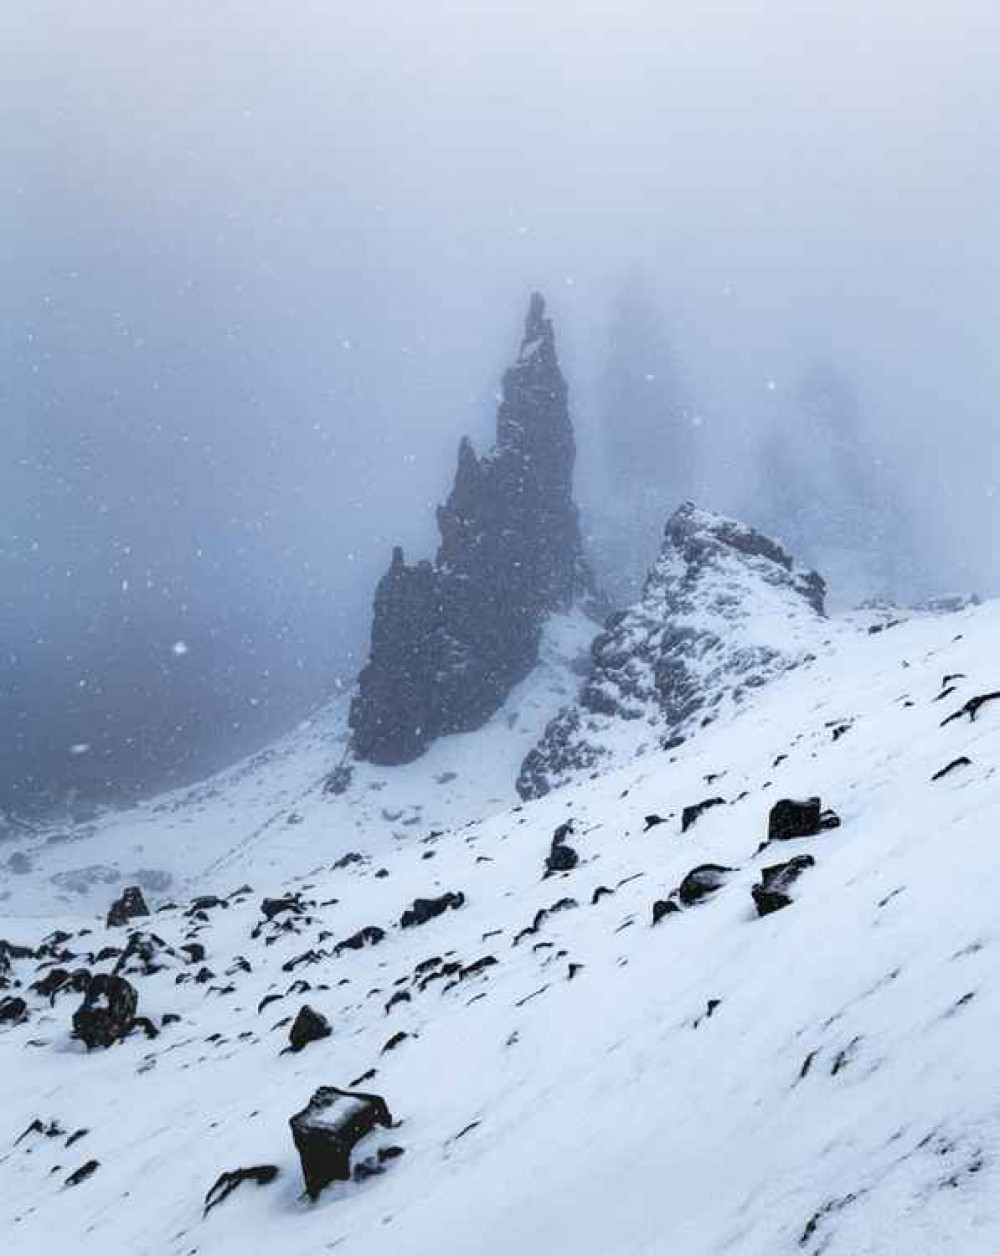 'The Storm of Storr' - the prize-winning photo by Ben Kapur